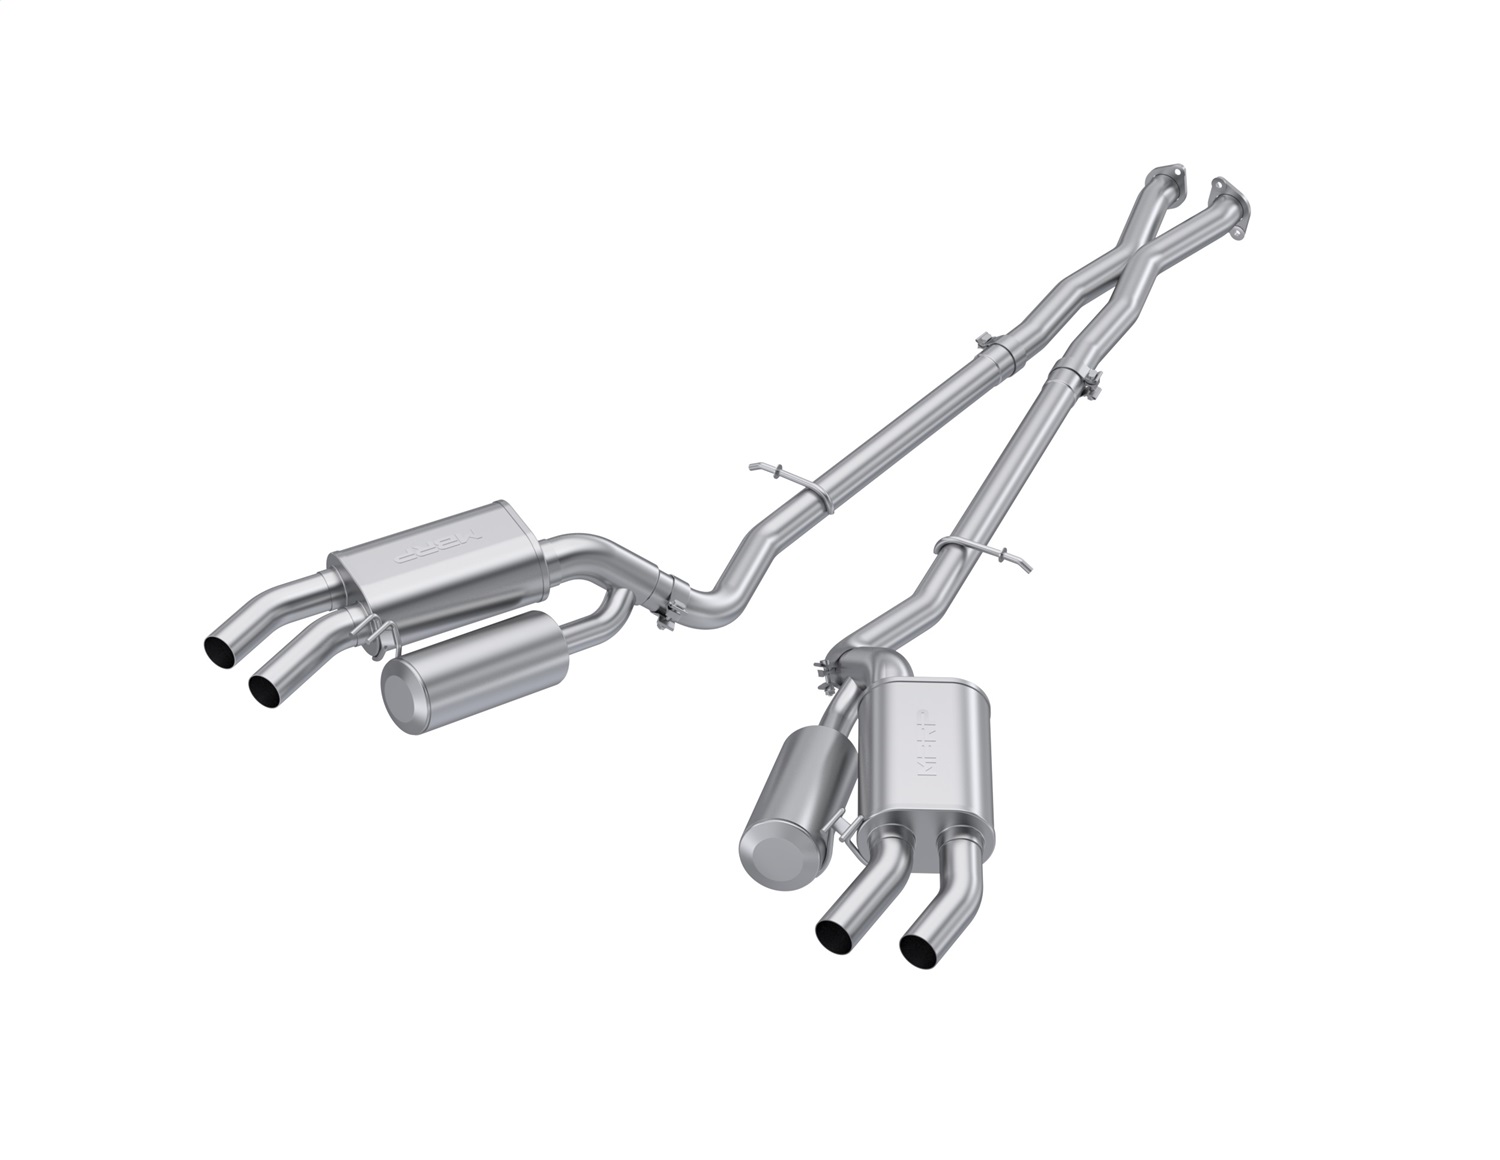 MBRP Exhaust S4704304 Armor Pro Cat Back Exhaust System Fits 18-21 Stinger